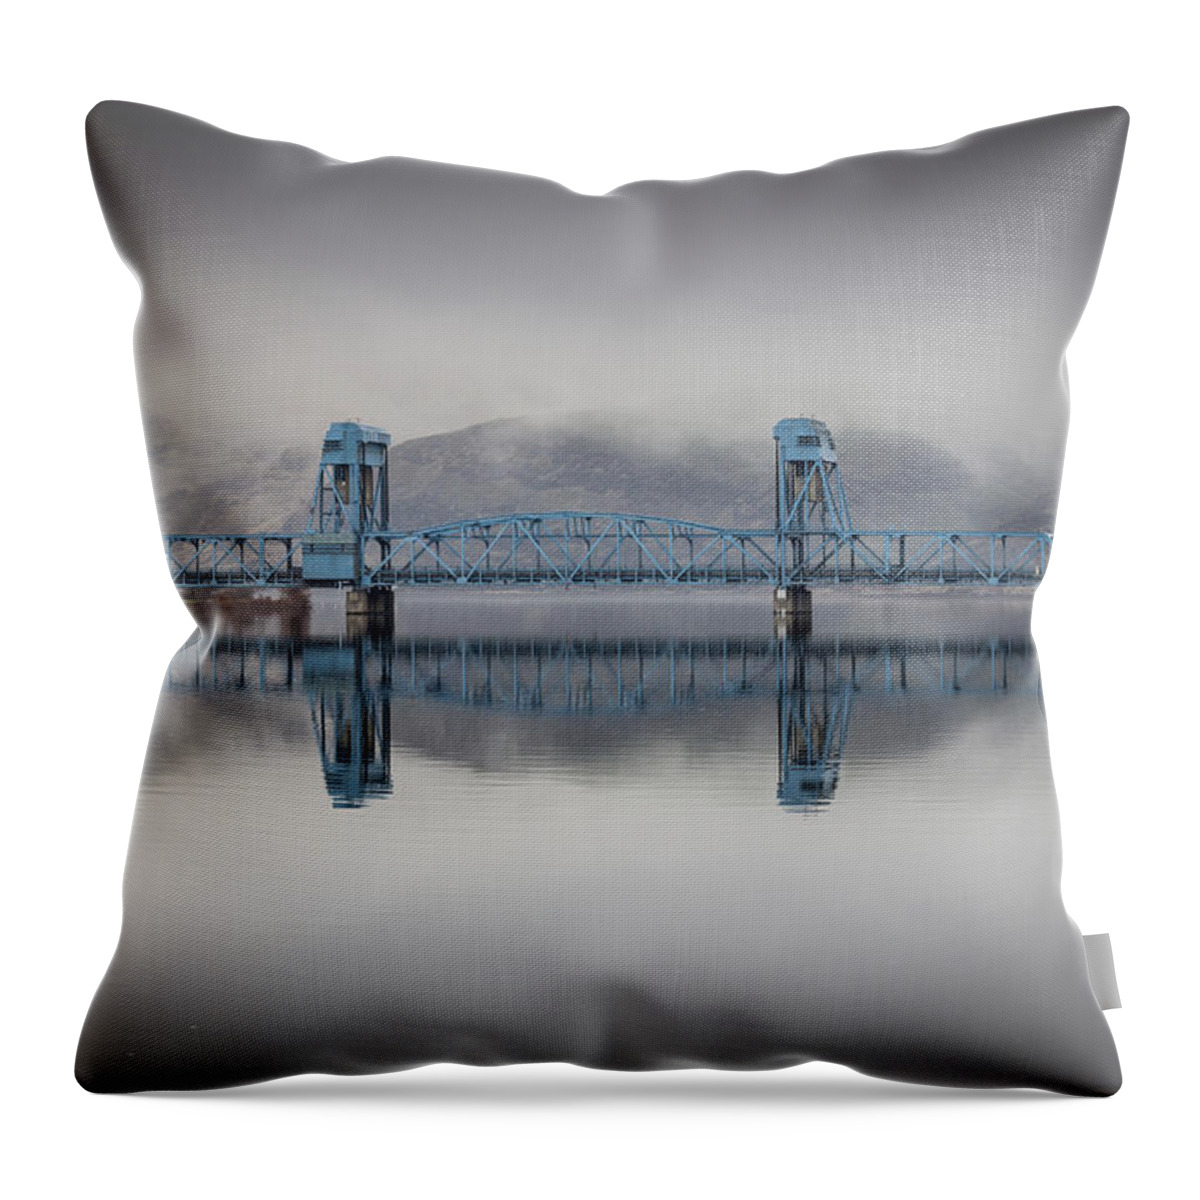 Lewiston Idaho Id Clarkston Washington Wa Lc-valley Lc Valley Pacific Northwest Lewis Clark Landscape Palouse Snake River Blue Interstate Bridge Water Rain Foggy Reflection Calm Serene Mist Misty Rainy Dreary Rocks September Day Throw Pillow featuring the photograph After the Rain by Brad Stinson